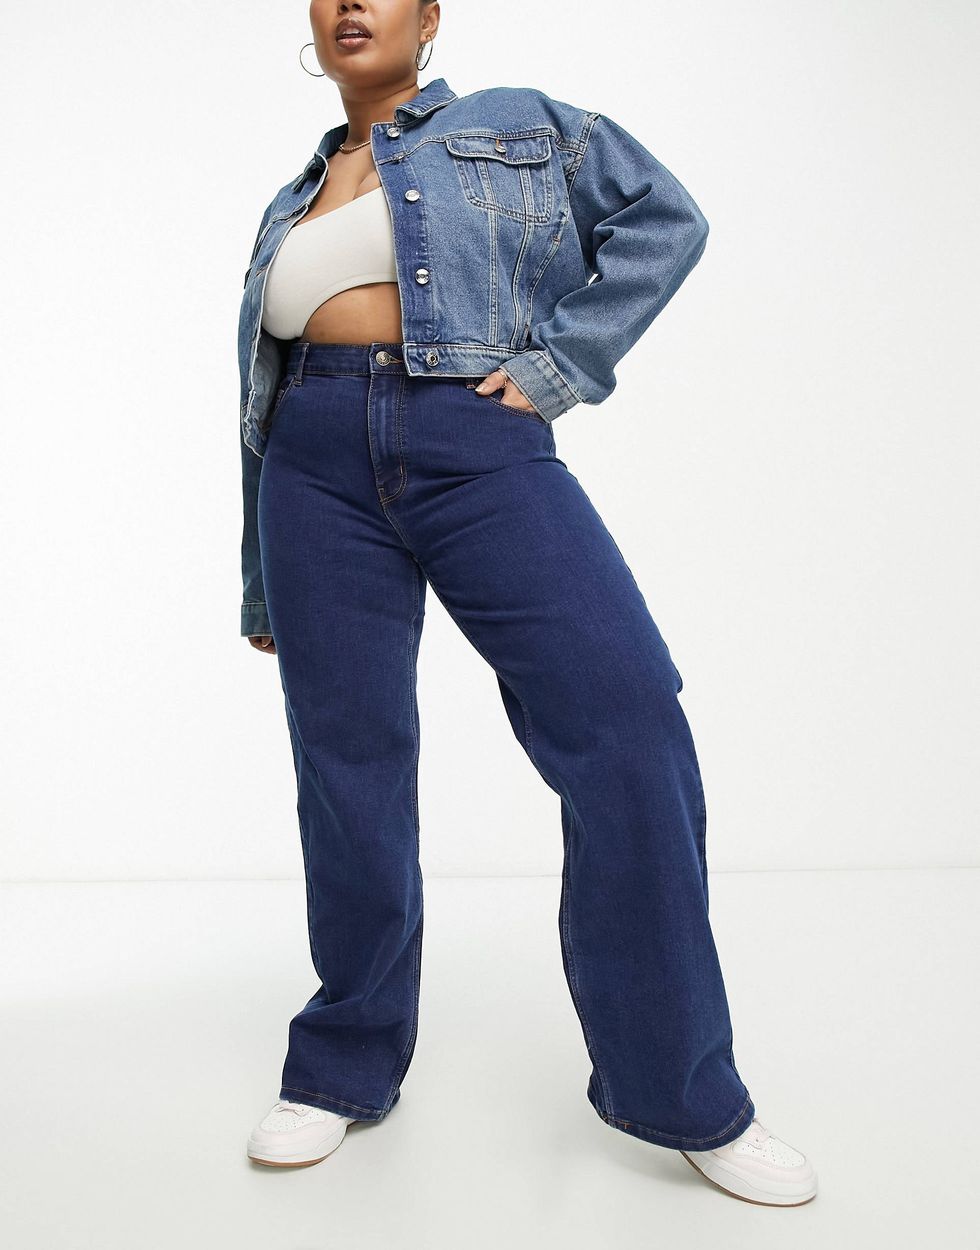 Best High-Waisted Jeans - Forbes Vetted